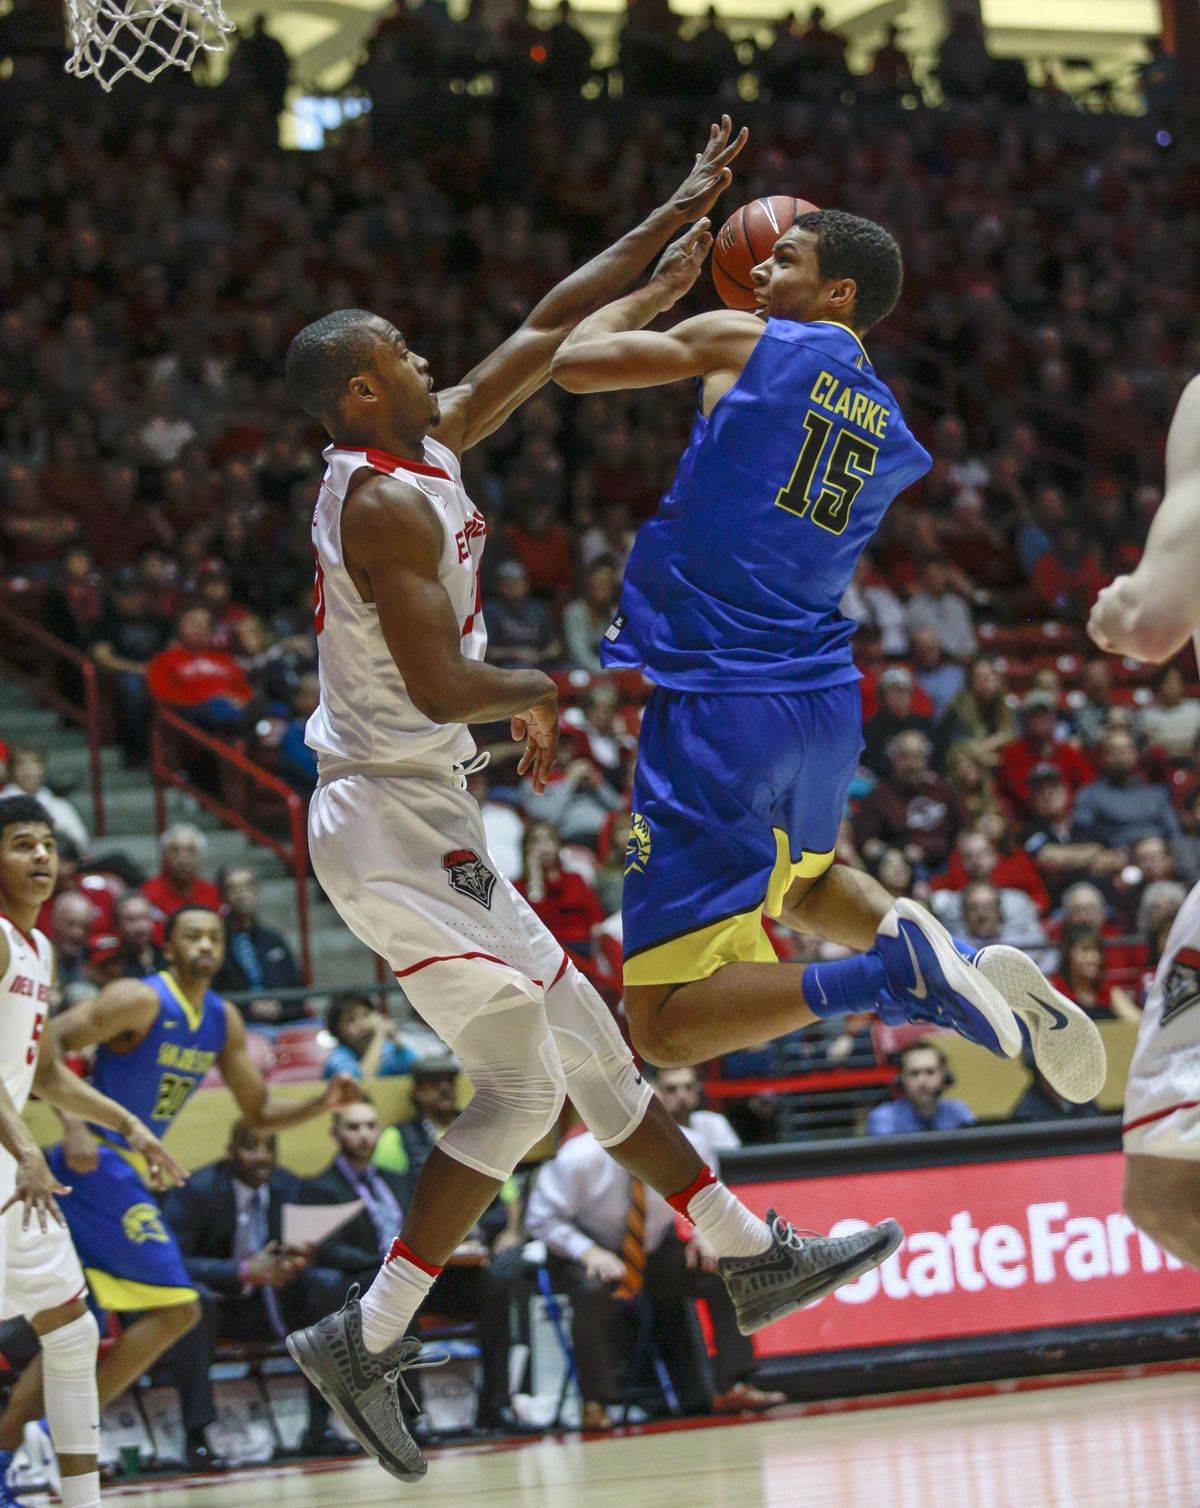 San Jose State’s Brandon Clarke (15) shoots over New Mexico’s Sam Logwood during the second half of an NCAA college basketball game in Albuquerque, N.M., Saturday, Feb. 4, 2017. San Jose State won 78-68. (Juan Antonio Labreche / Associated Press)